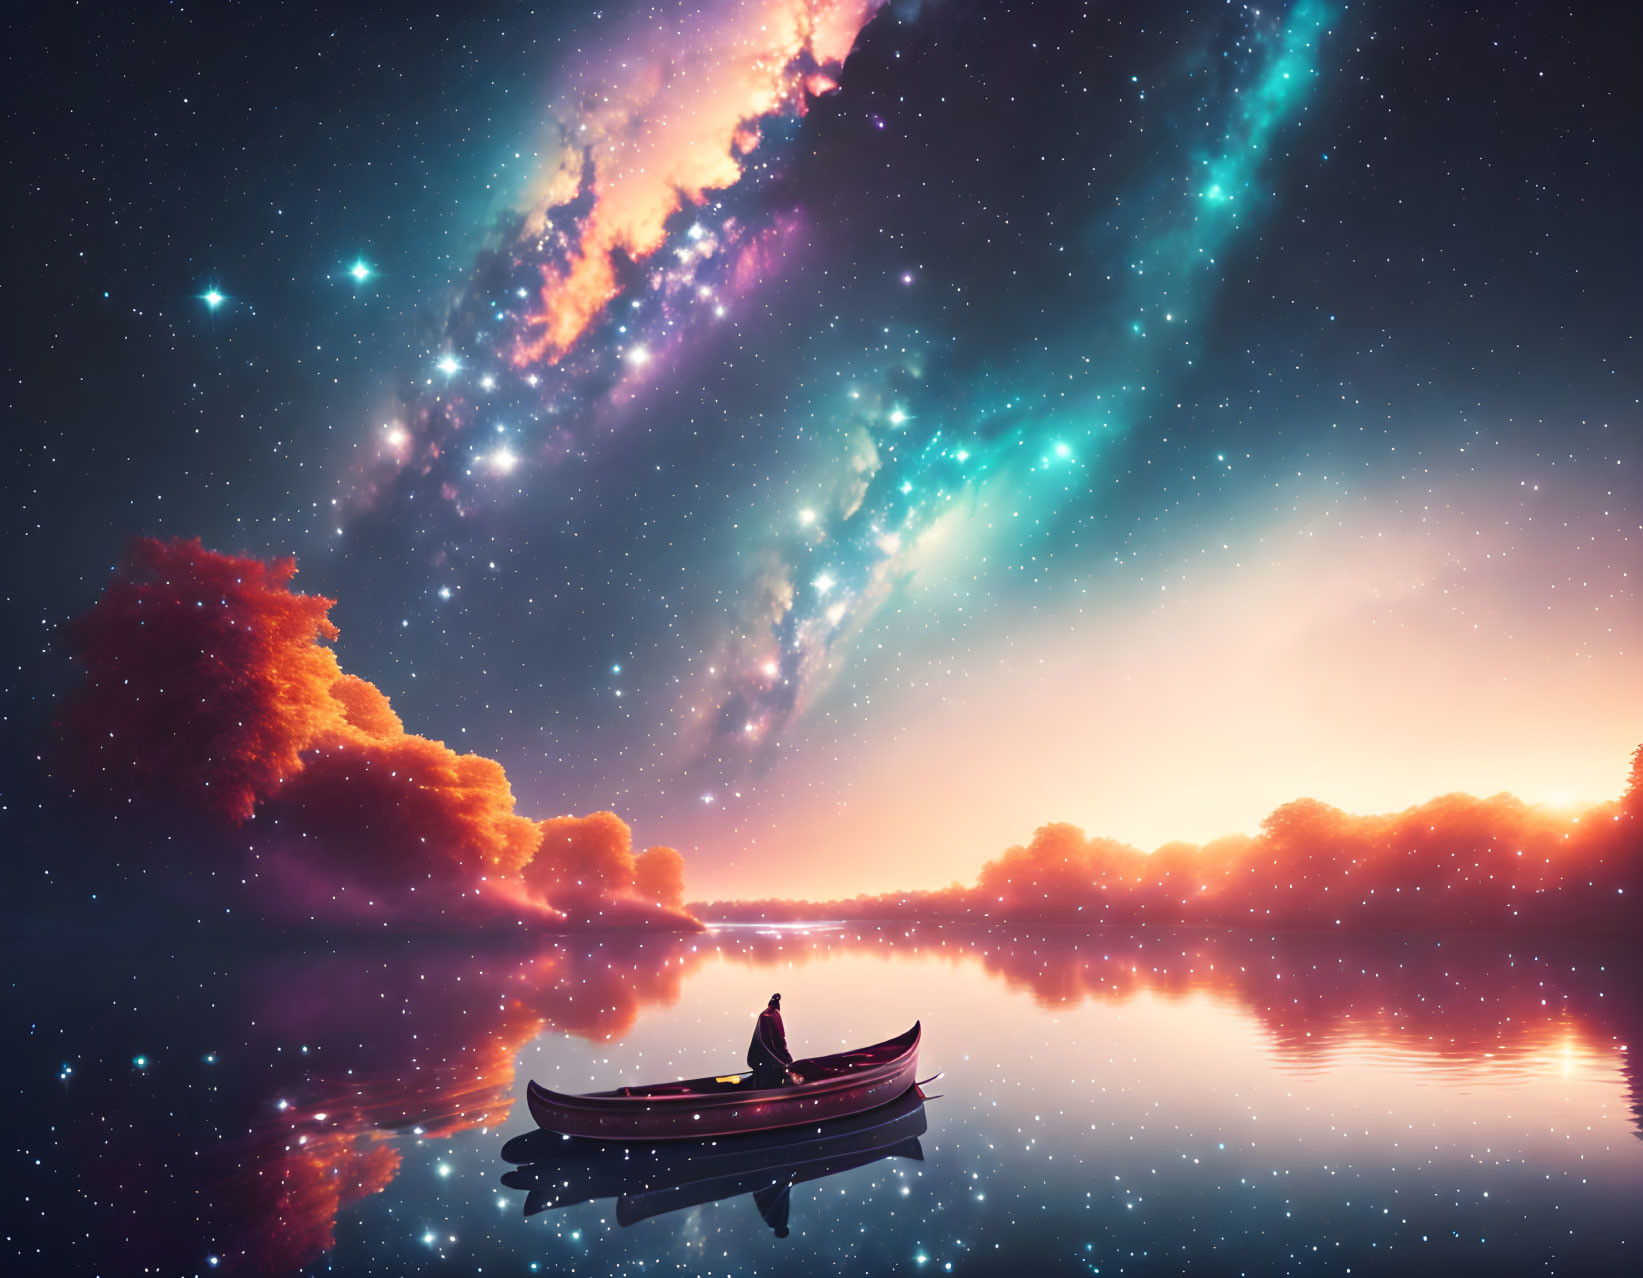 Person in boat on mirror-like lake under colorful starry sky